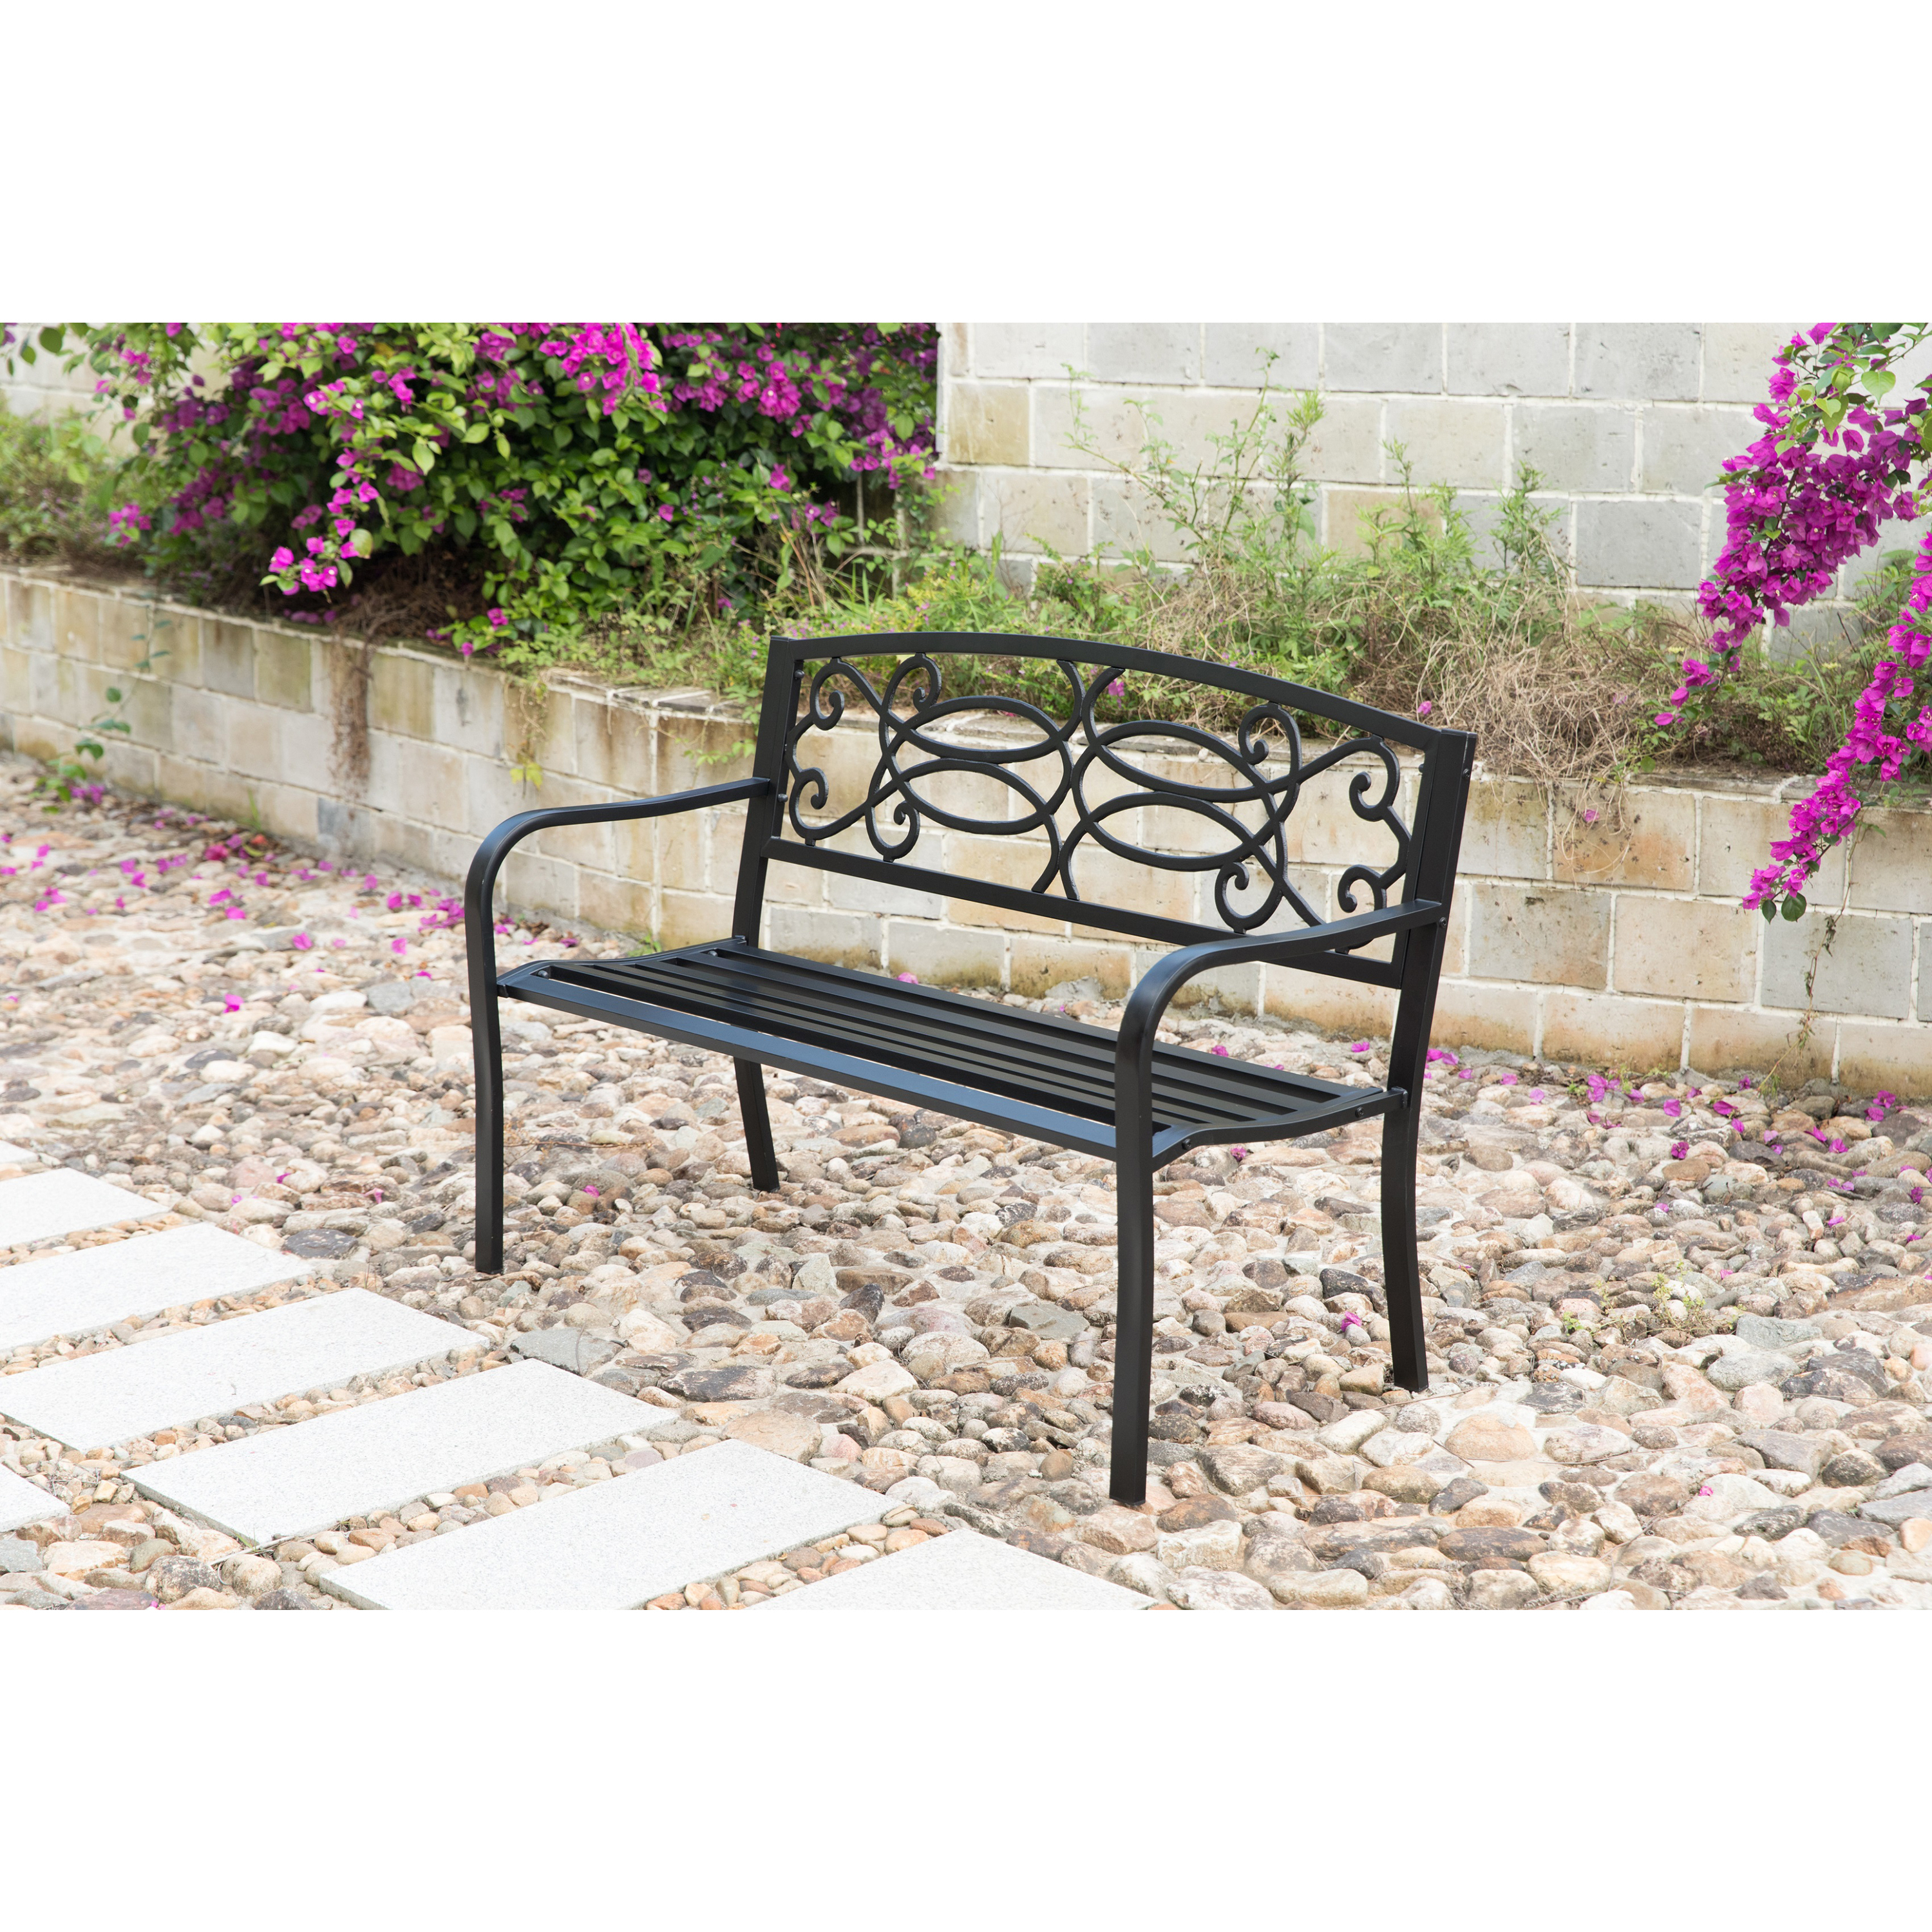 Steel Outdoor Patio Garden Park Seating Bench With Cast Iron Scrollwork Backrest, Front Porch Yard Bench Lawn Decor